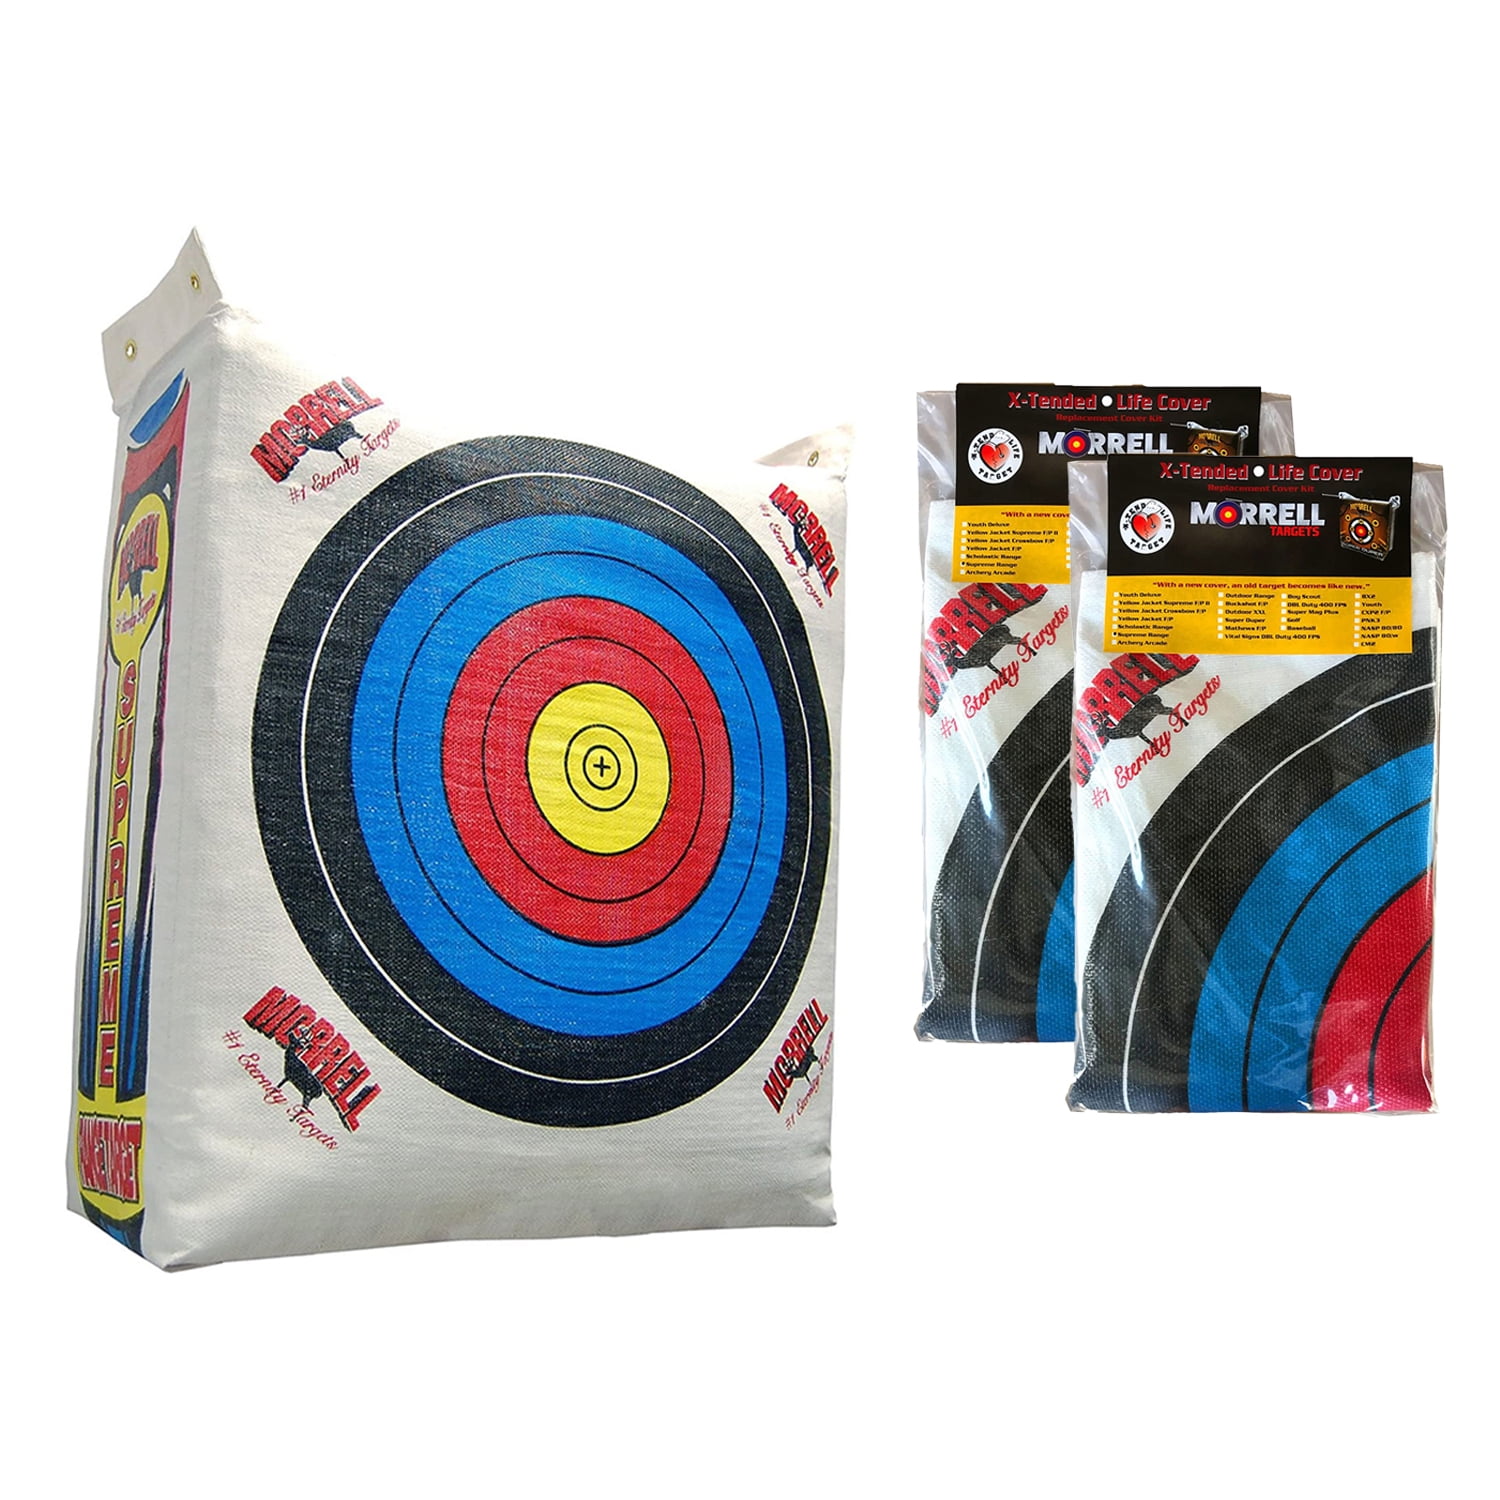 New Morrell Supreme Range Bag Archery Target REPLACEMENT COVER 